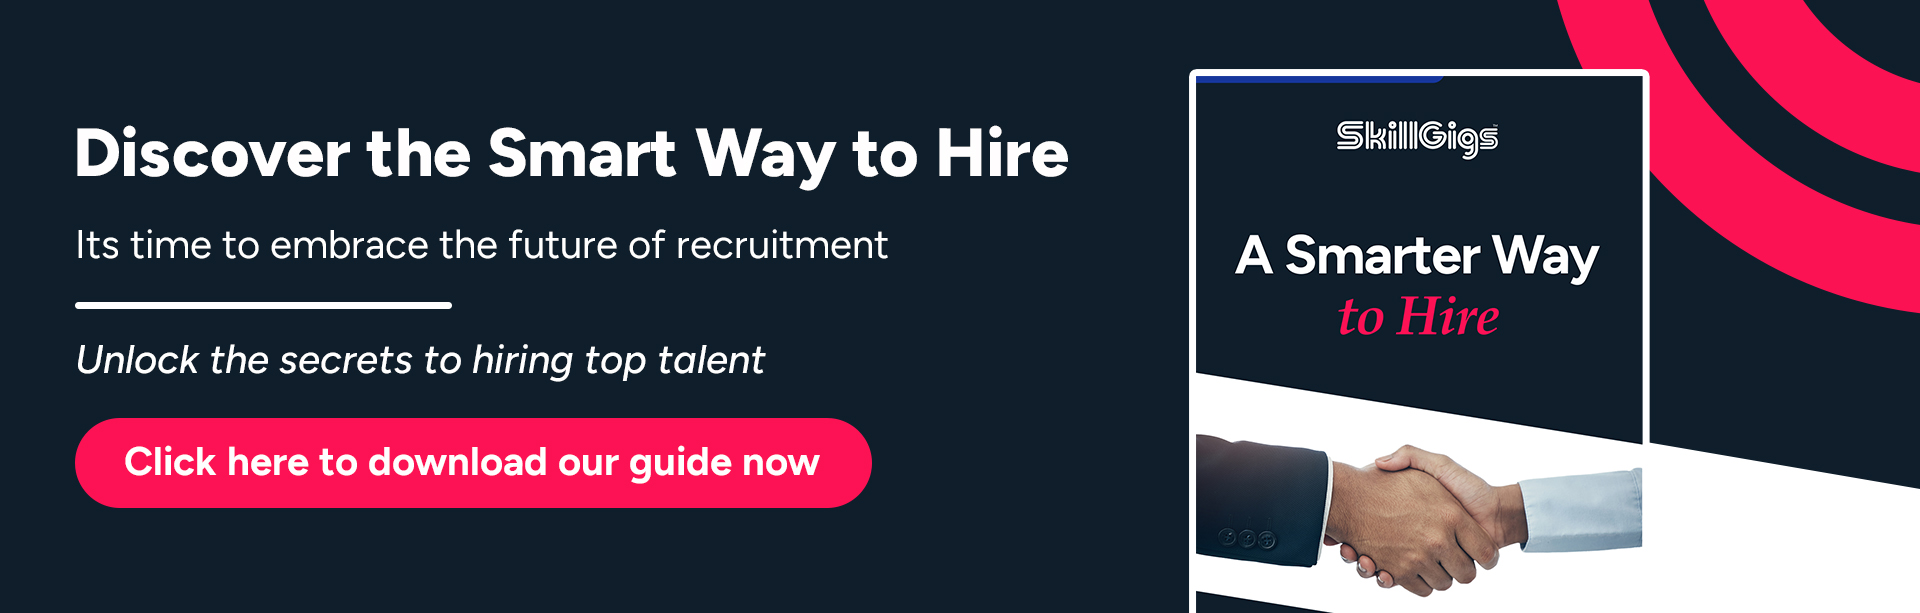 Smarter way to hire